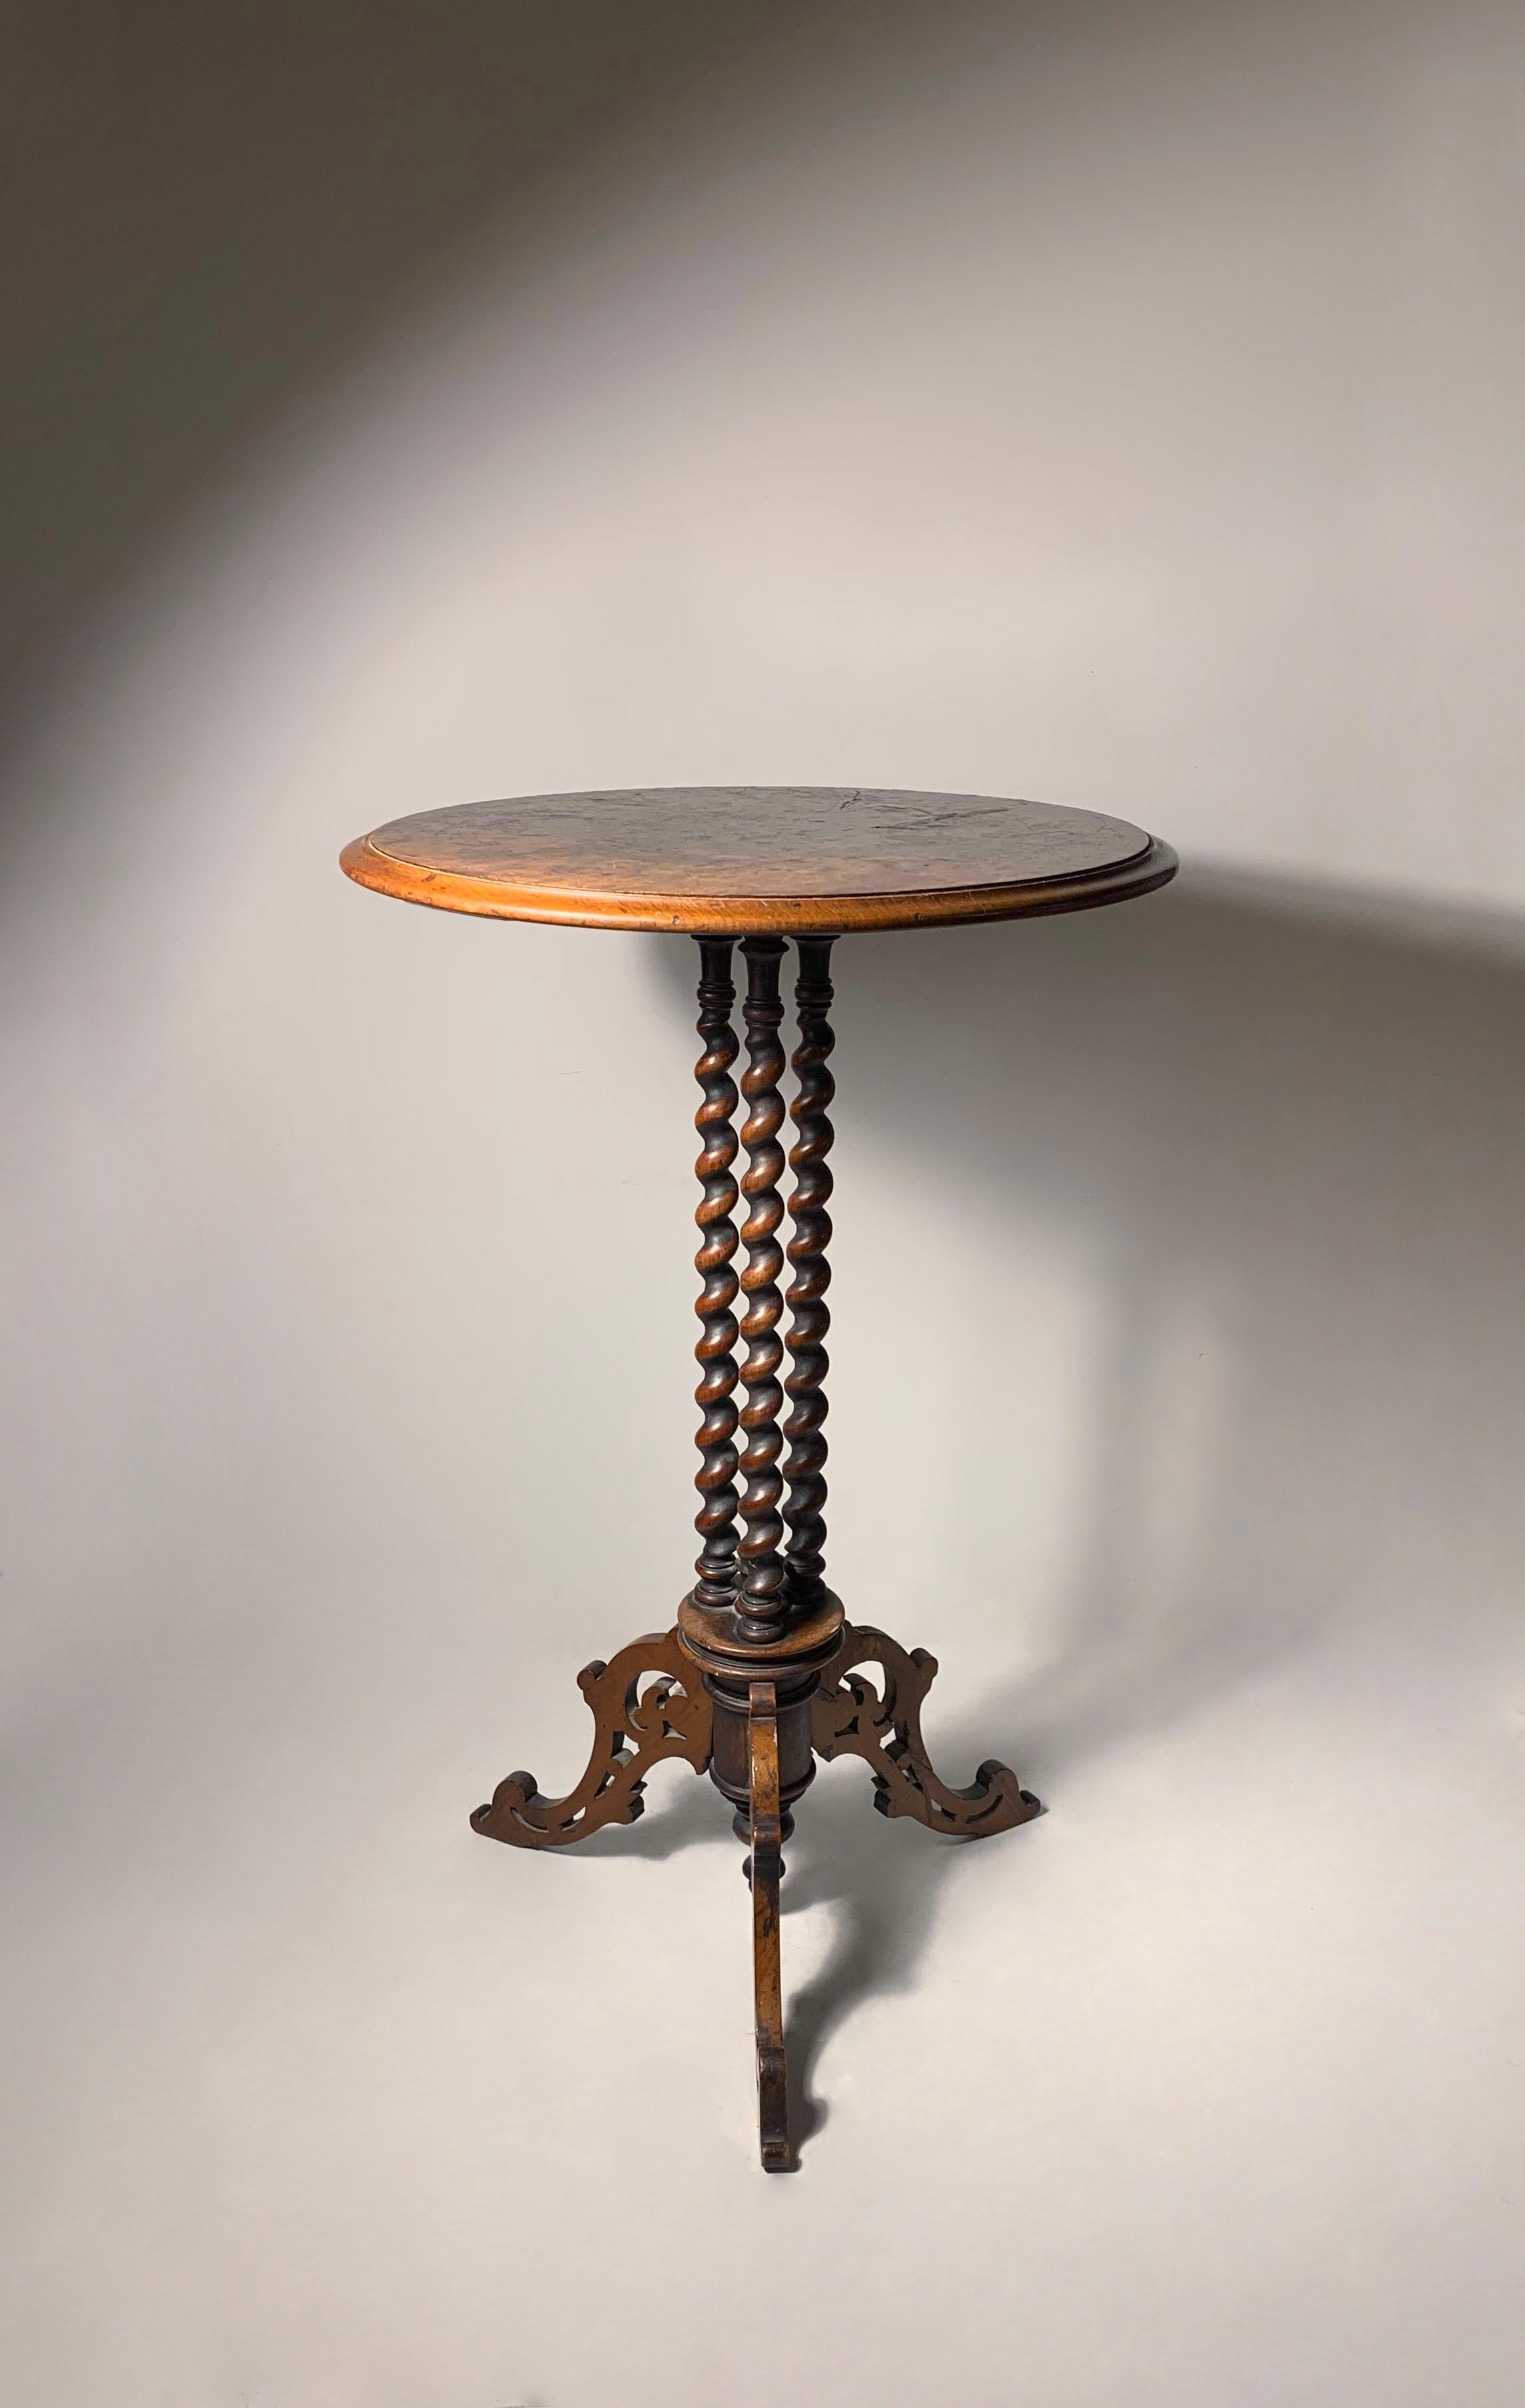 A Fine Candle Stand Table by Johnstone & Jeanes of London. A gem of a piece by J & J showcasing finest craftsmanship and design in a elegant petite size table.

Uncertain to what the missing screws are from the underside.  Purchased in as-found